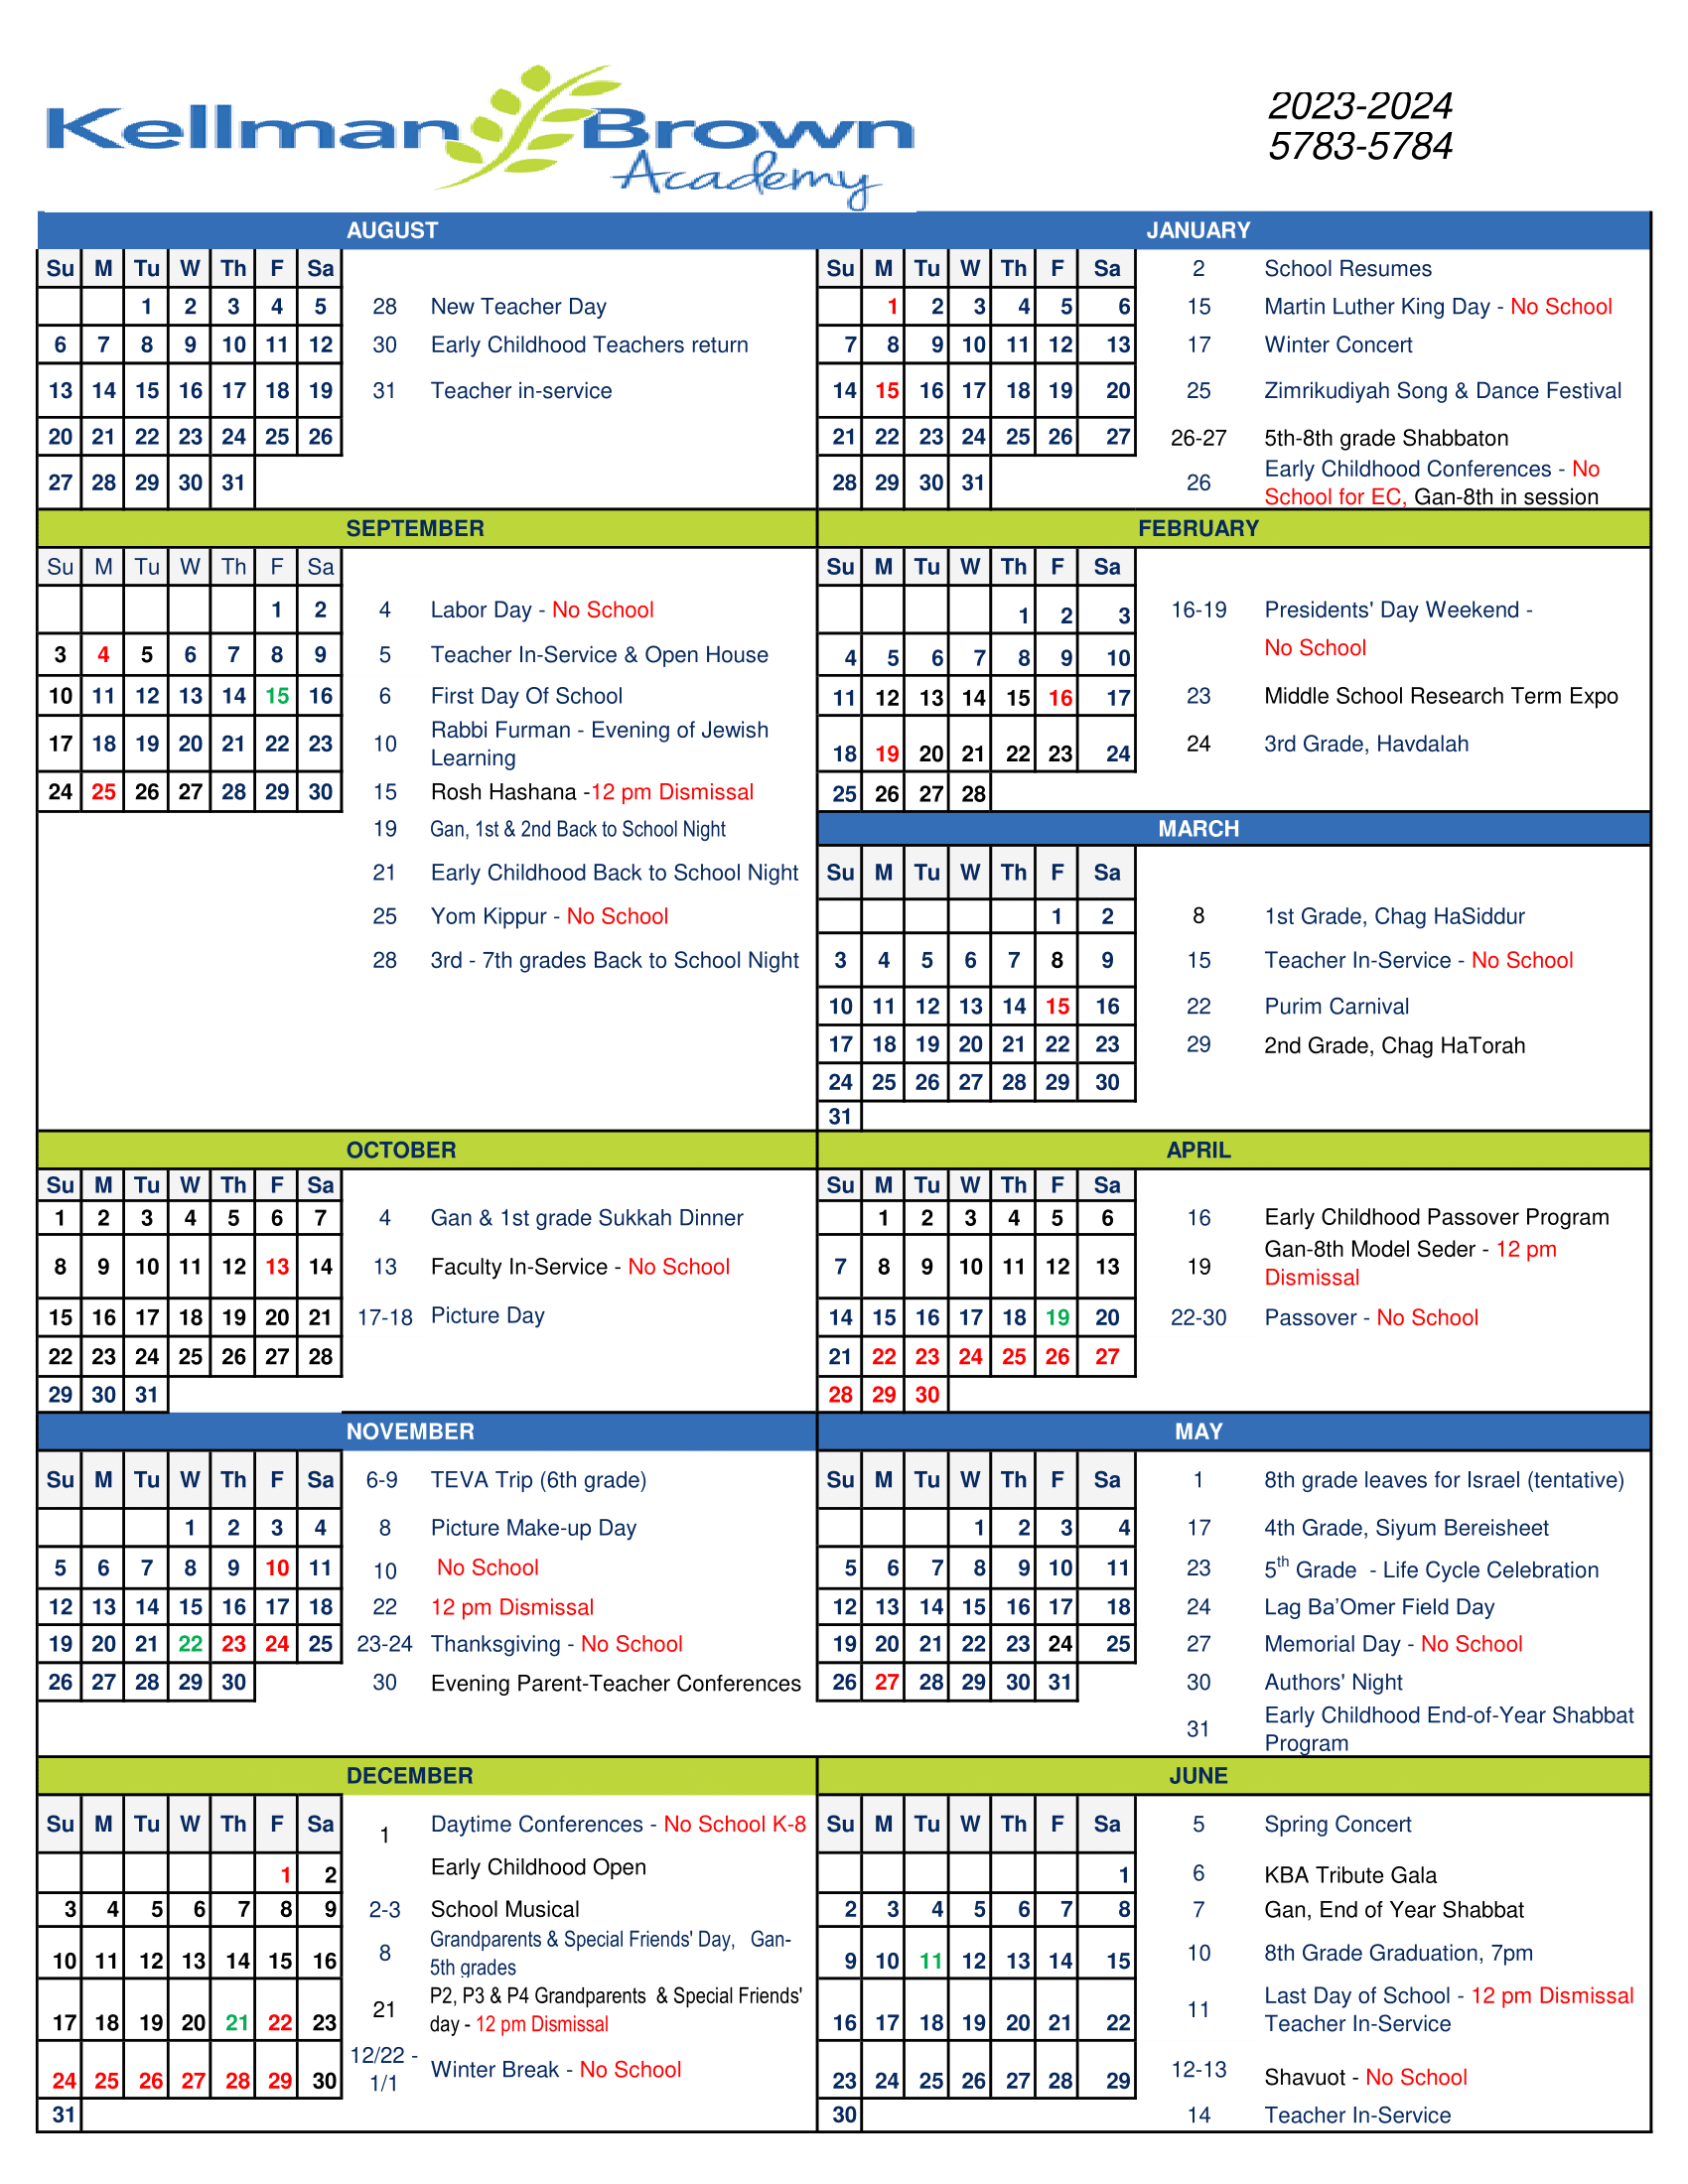 2023/2024 School Calendar — Private school Southern New Jersey, Day